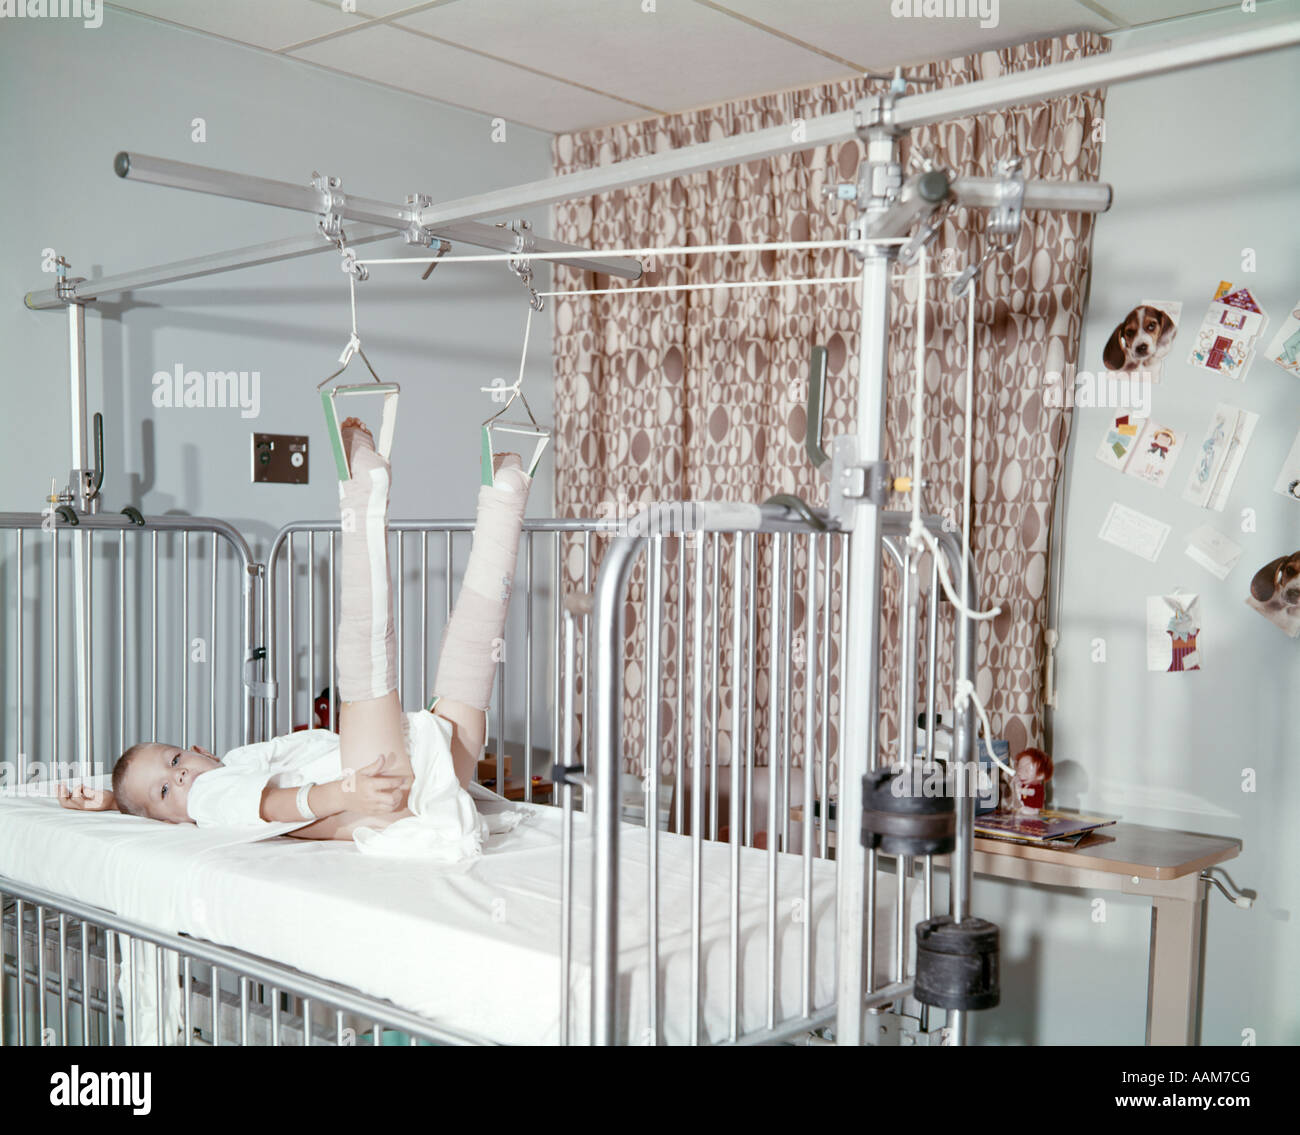 1960 BOY CHILD IN HOSPITAL BED TRACTION AVEC DEUX jambes cassées LOOKING AT CAMERA Banque D'Images